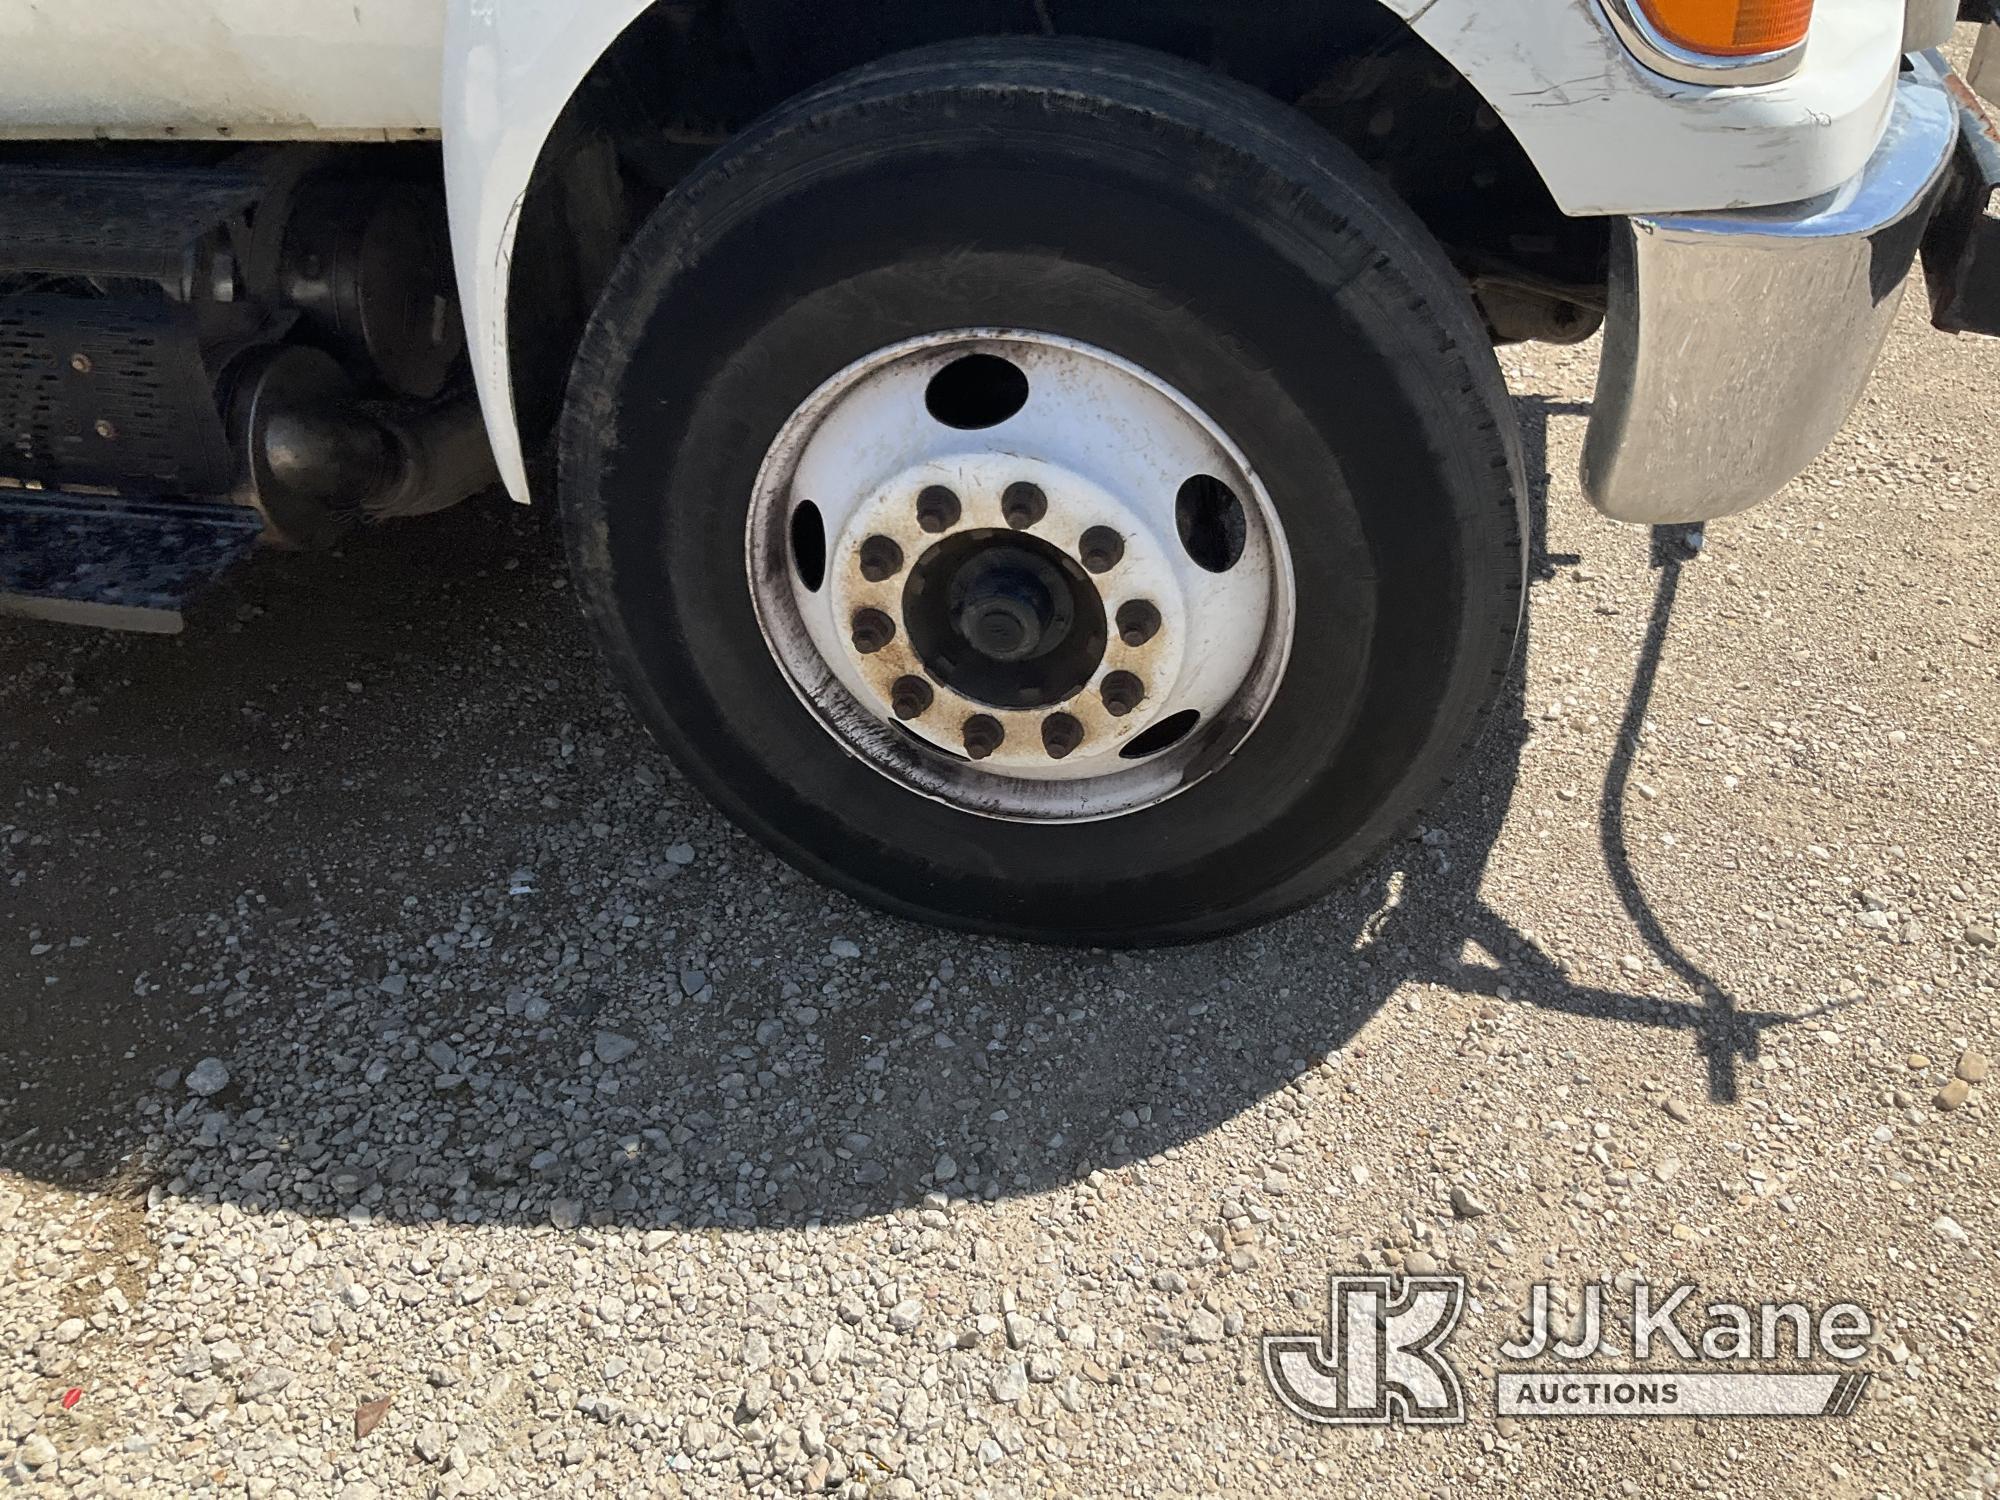 (Waxahachie, TX) 2013 Ford F750 Chipper Dump Truck Not Running, Condition Unknown, Body Damage) (Sel